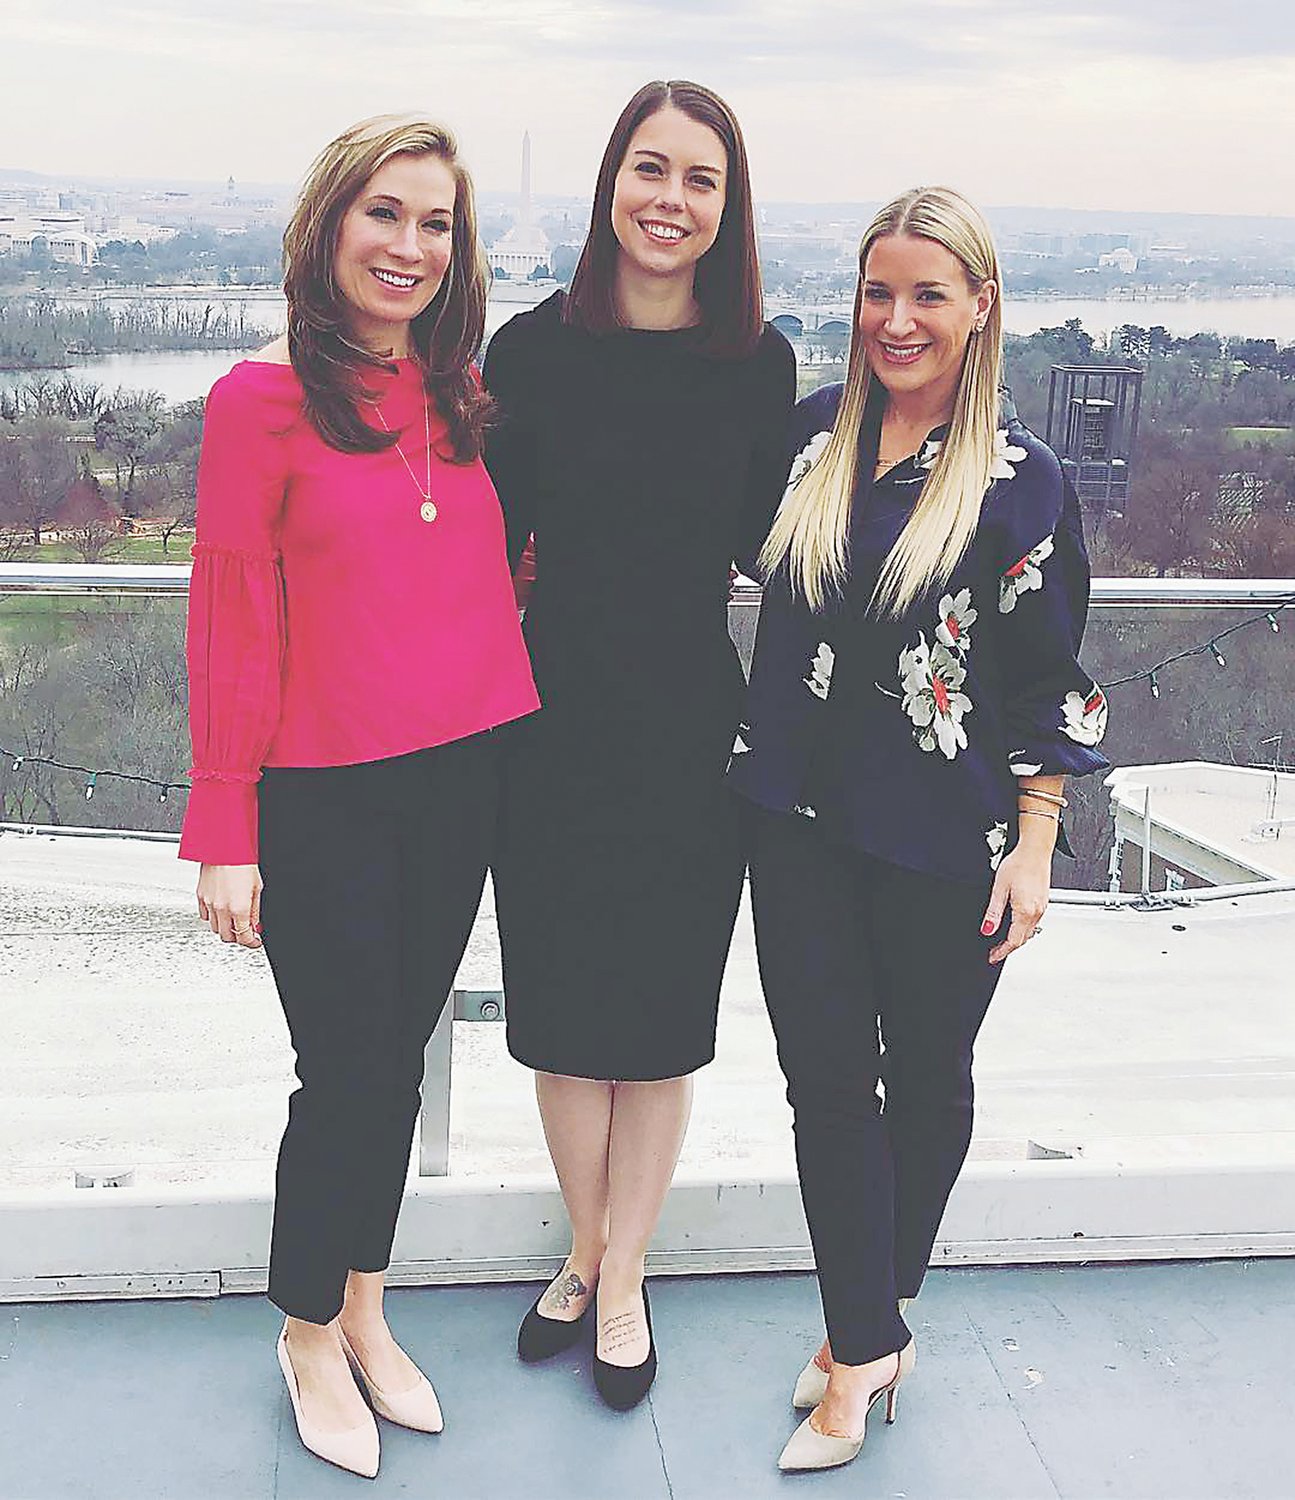 Amy Looney Heffernan, Heather Kelly and Ryan Manion were together in Washington for an interview in April 2018.